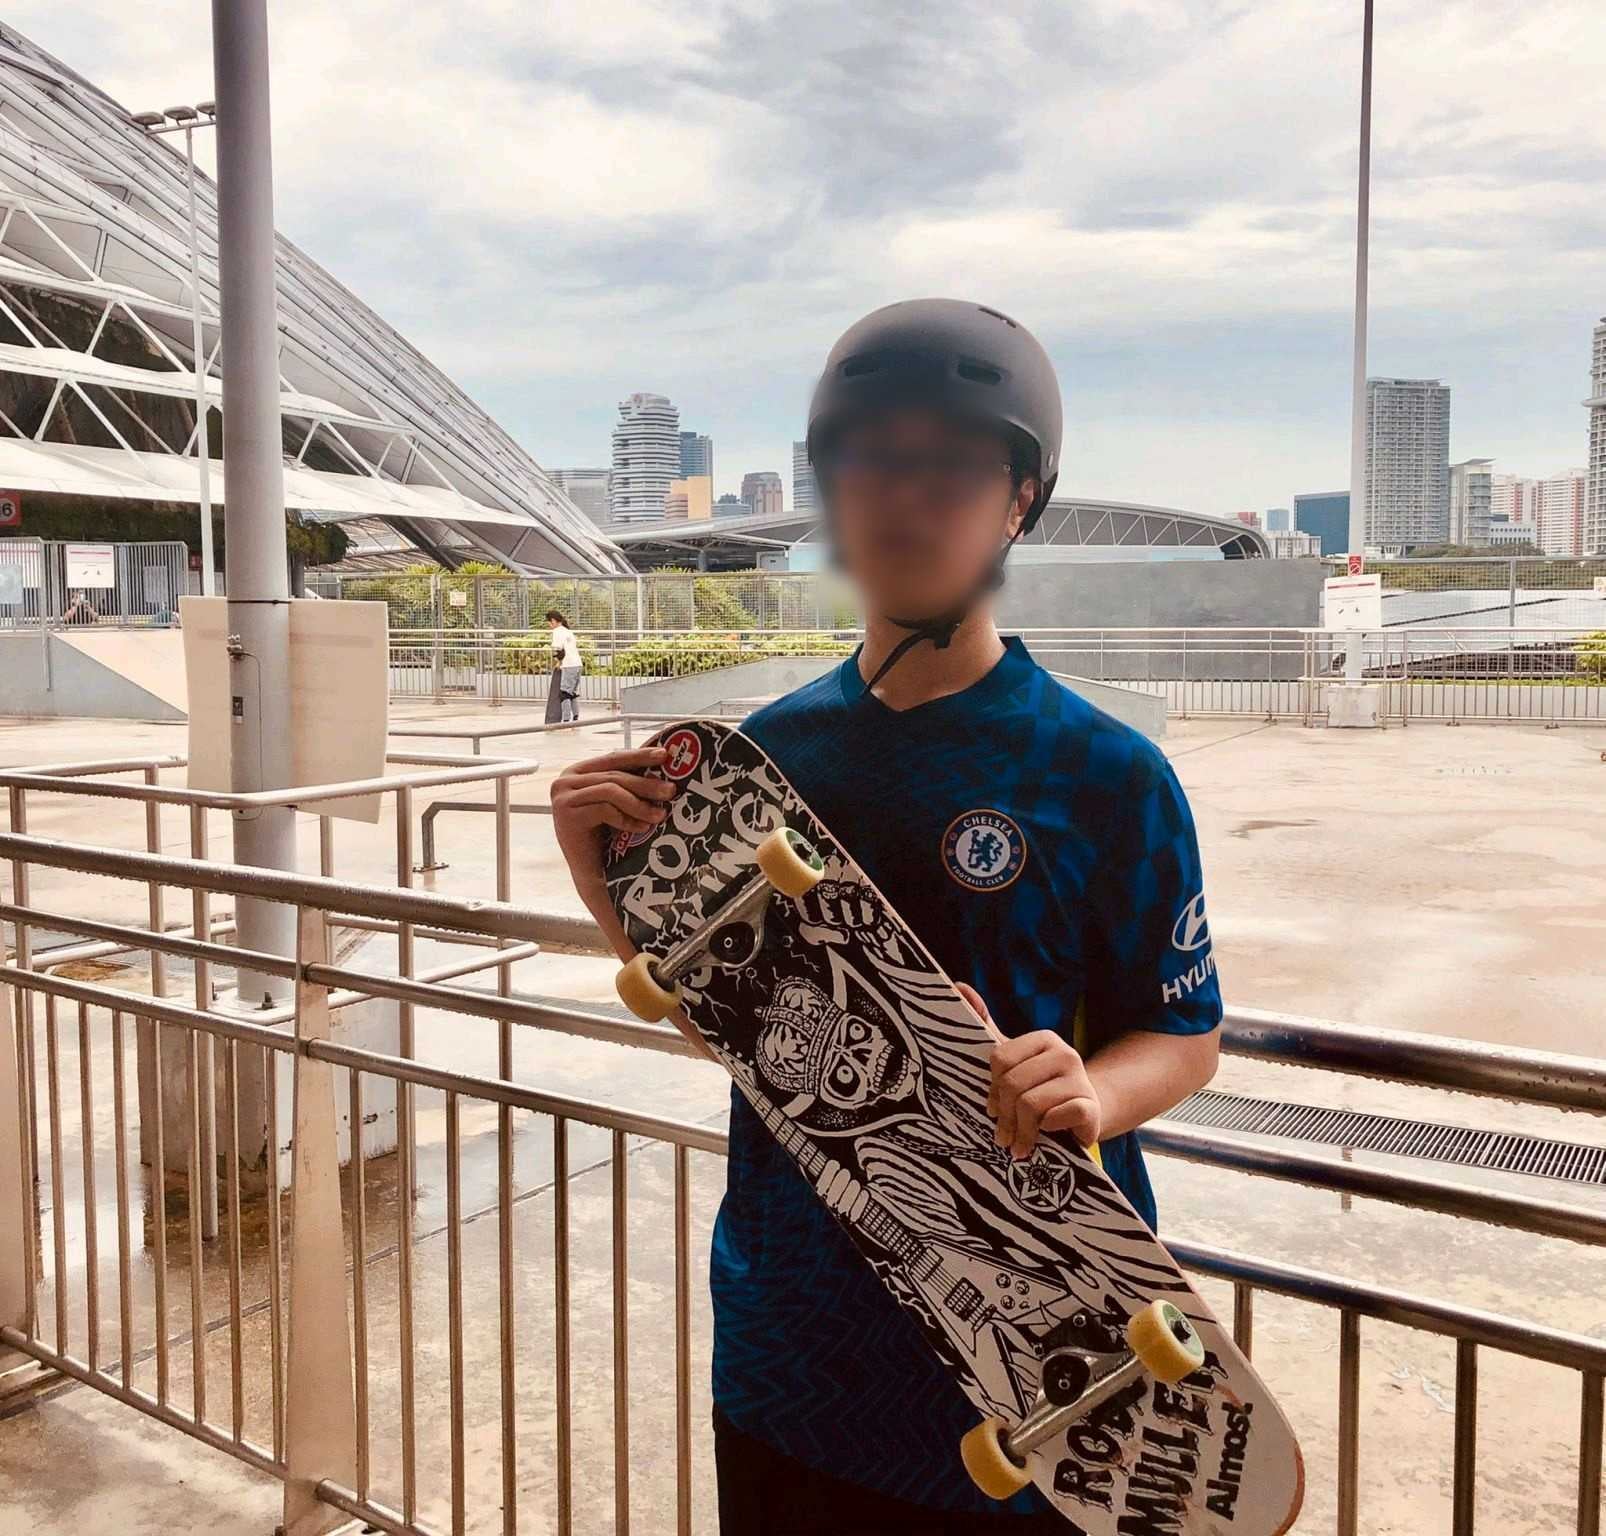 Child With Autism Bullied Finds Confidence In Skateboarding